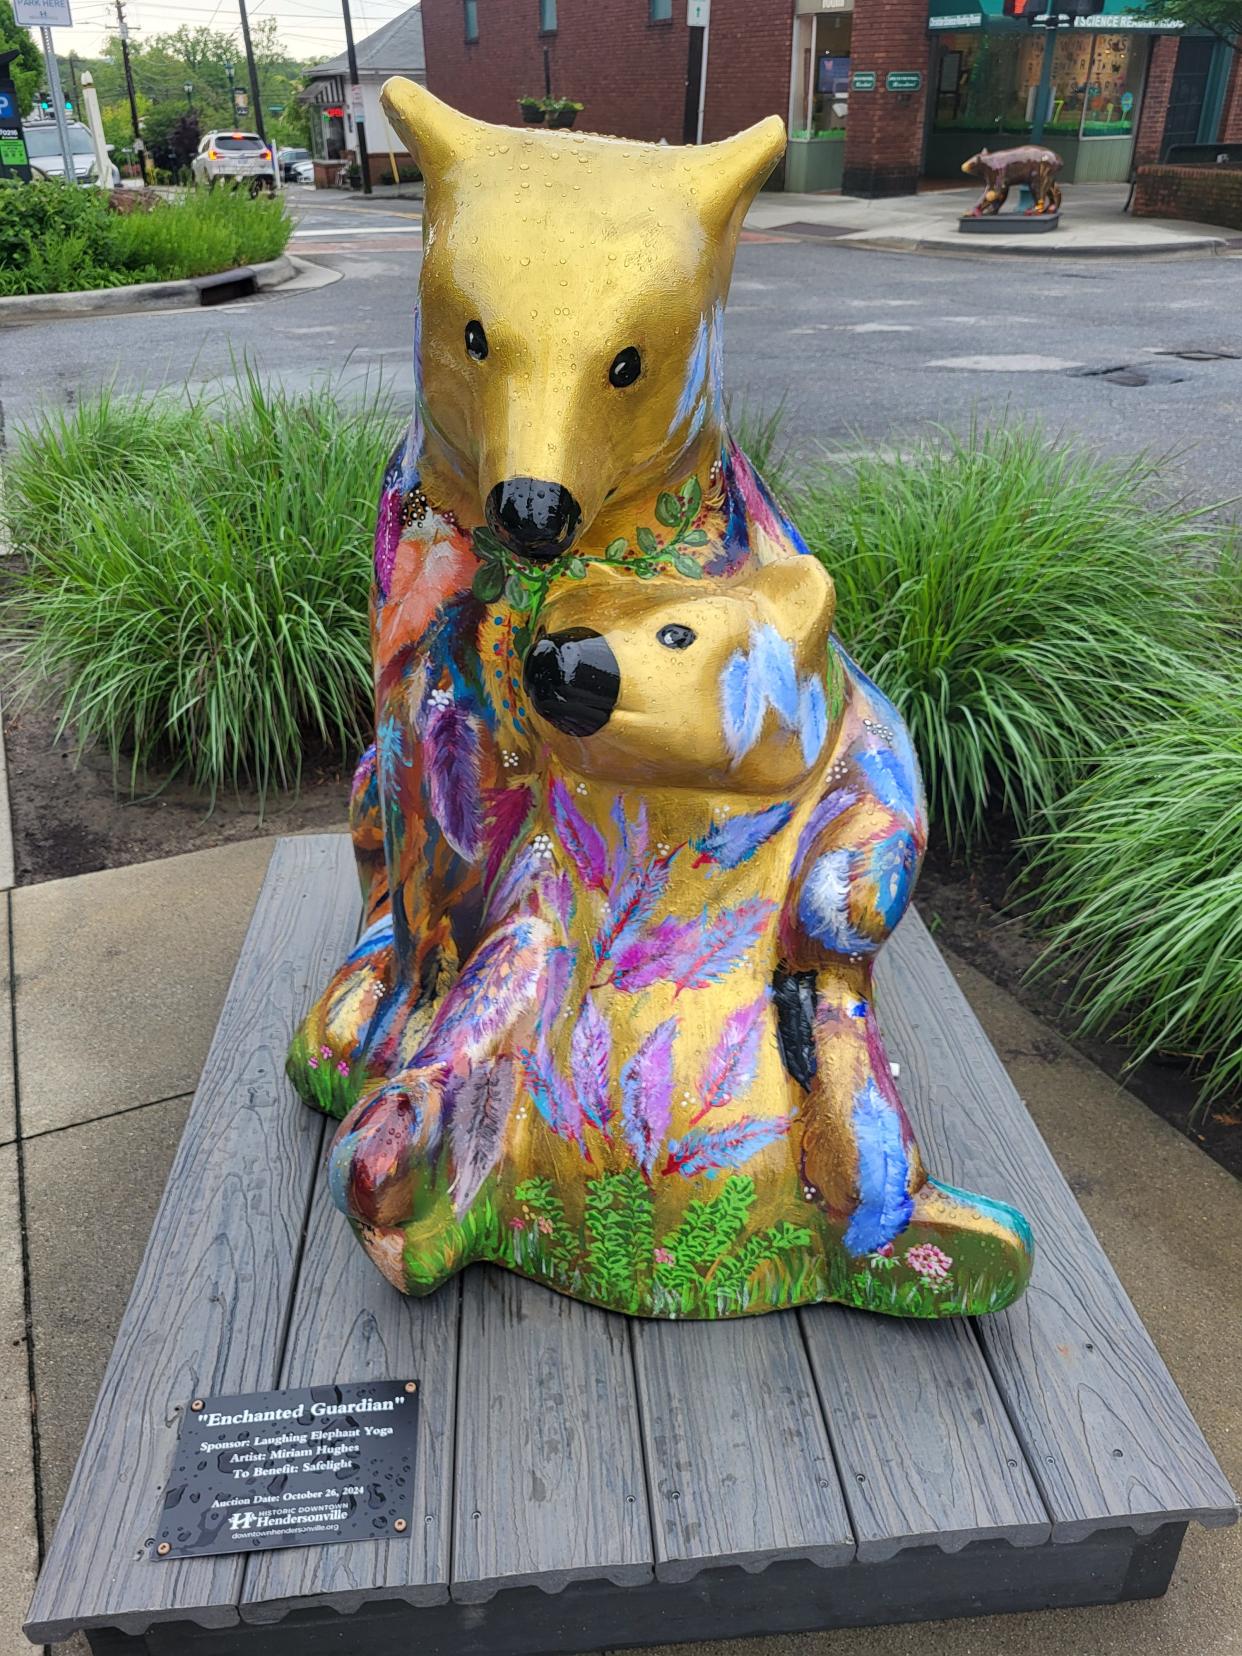 "Enchanted Guardian" bear is one of the 20 new Bearfootin' Bears now on display along Main Street in Hendersonville.